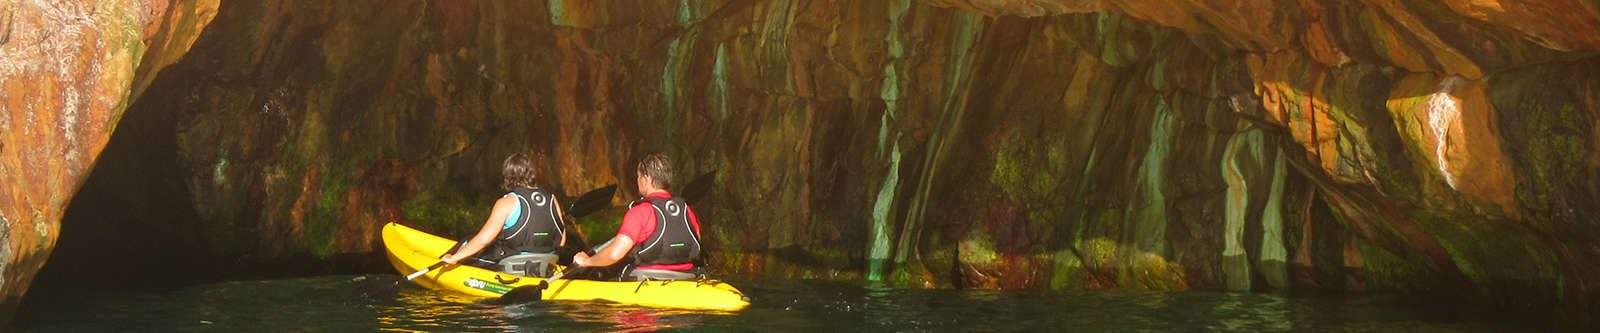 kayaking into a cave